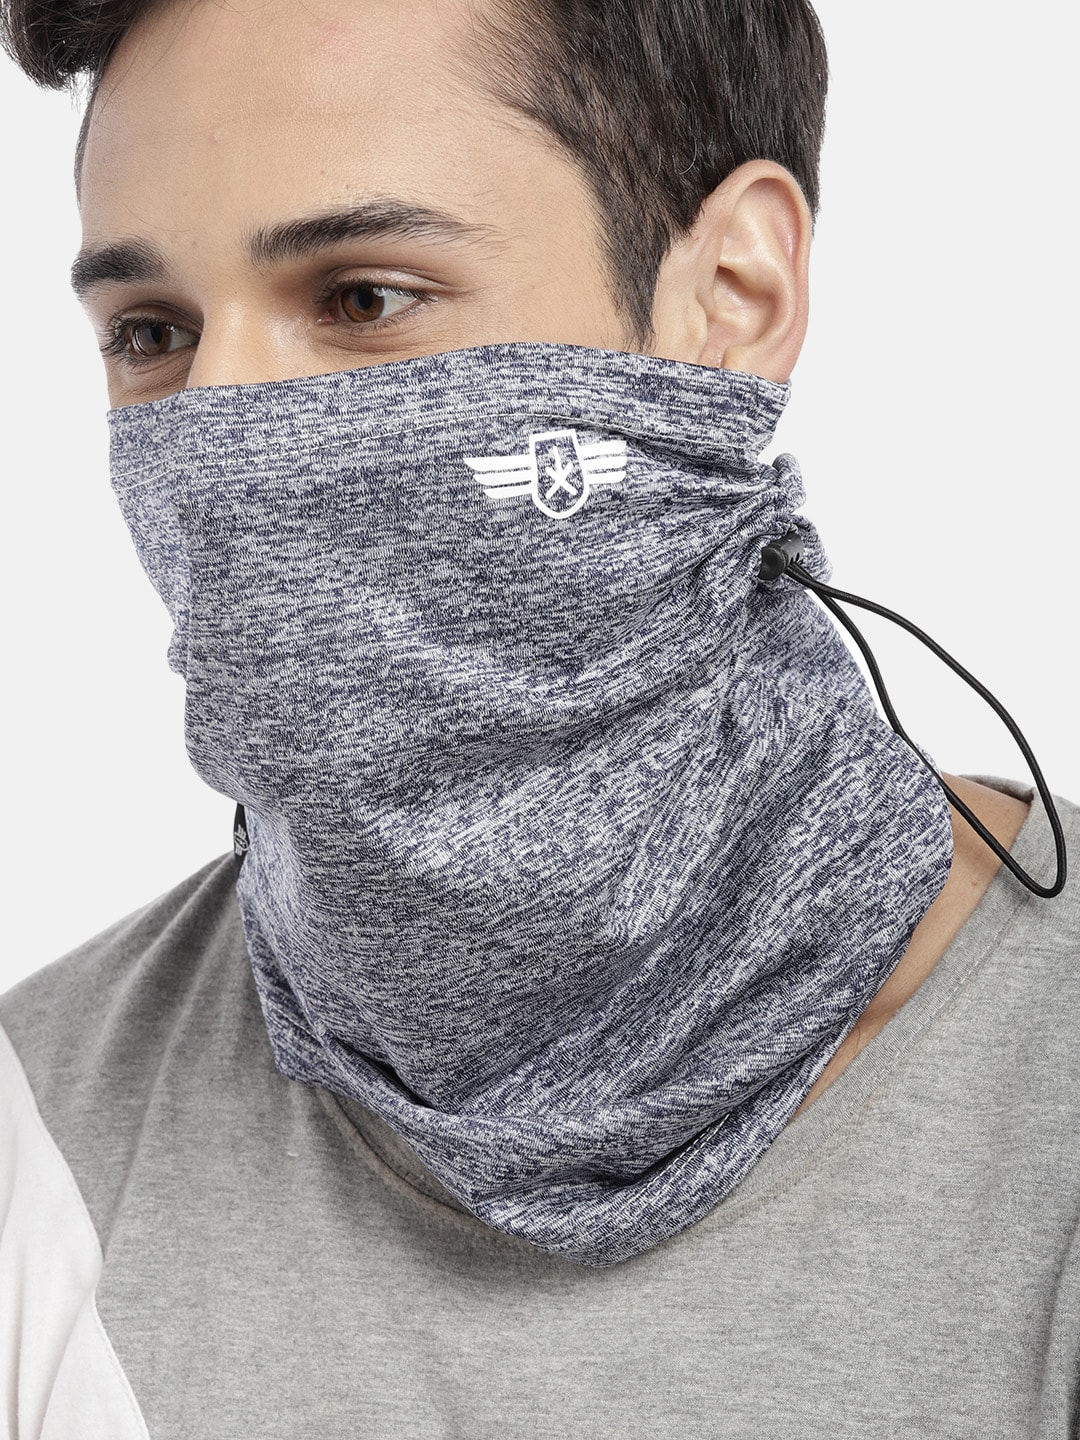 Roadster Unisex Navy & Grey Solid 1-Ply Reusable Outdoor Cloth Scarf Mask Price in India